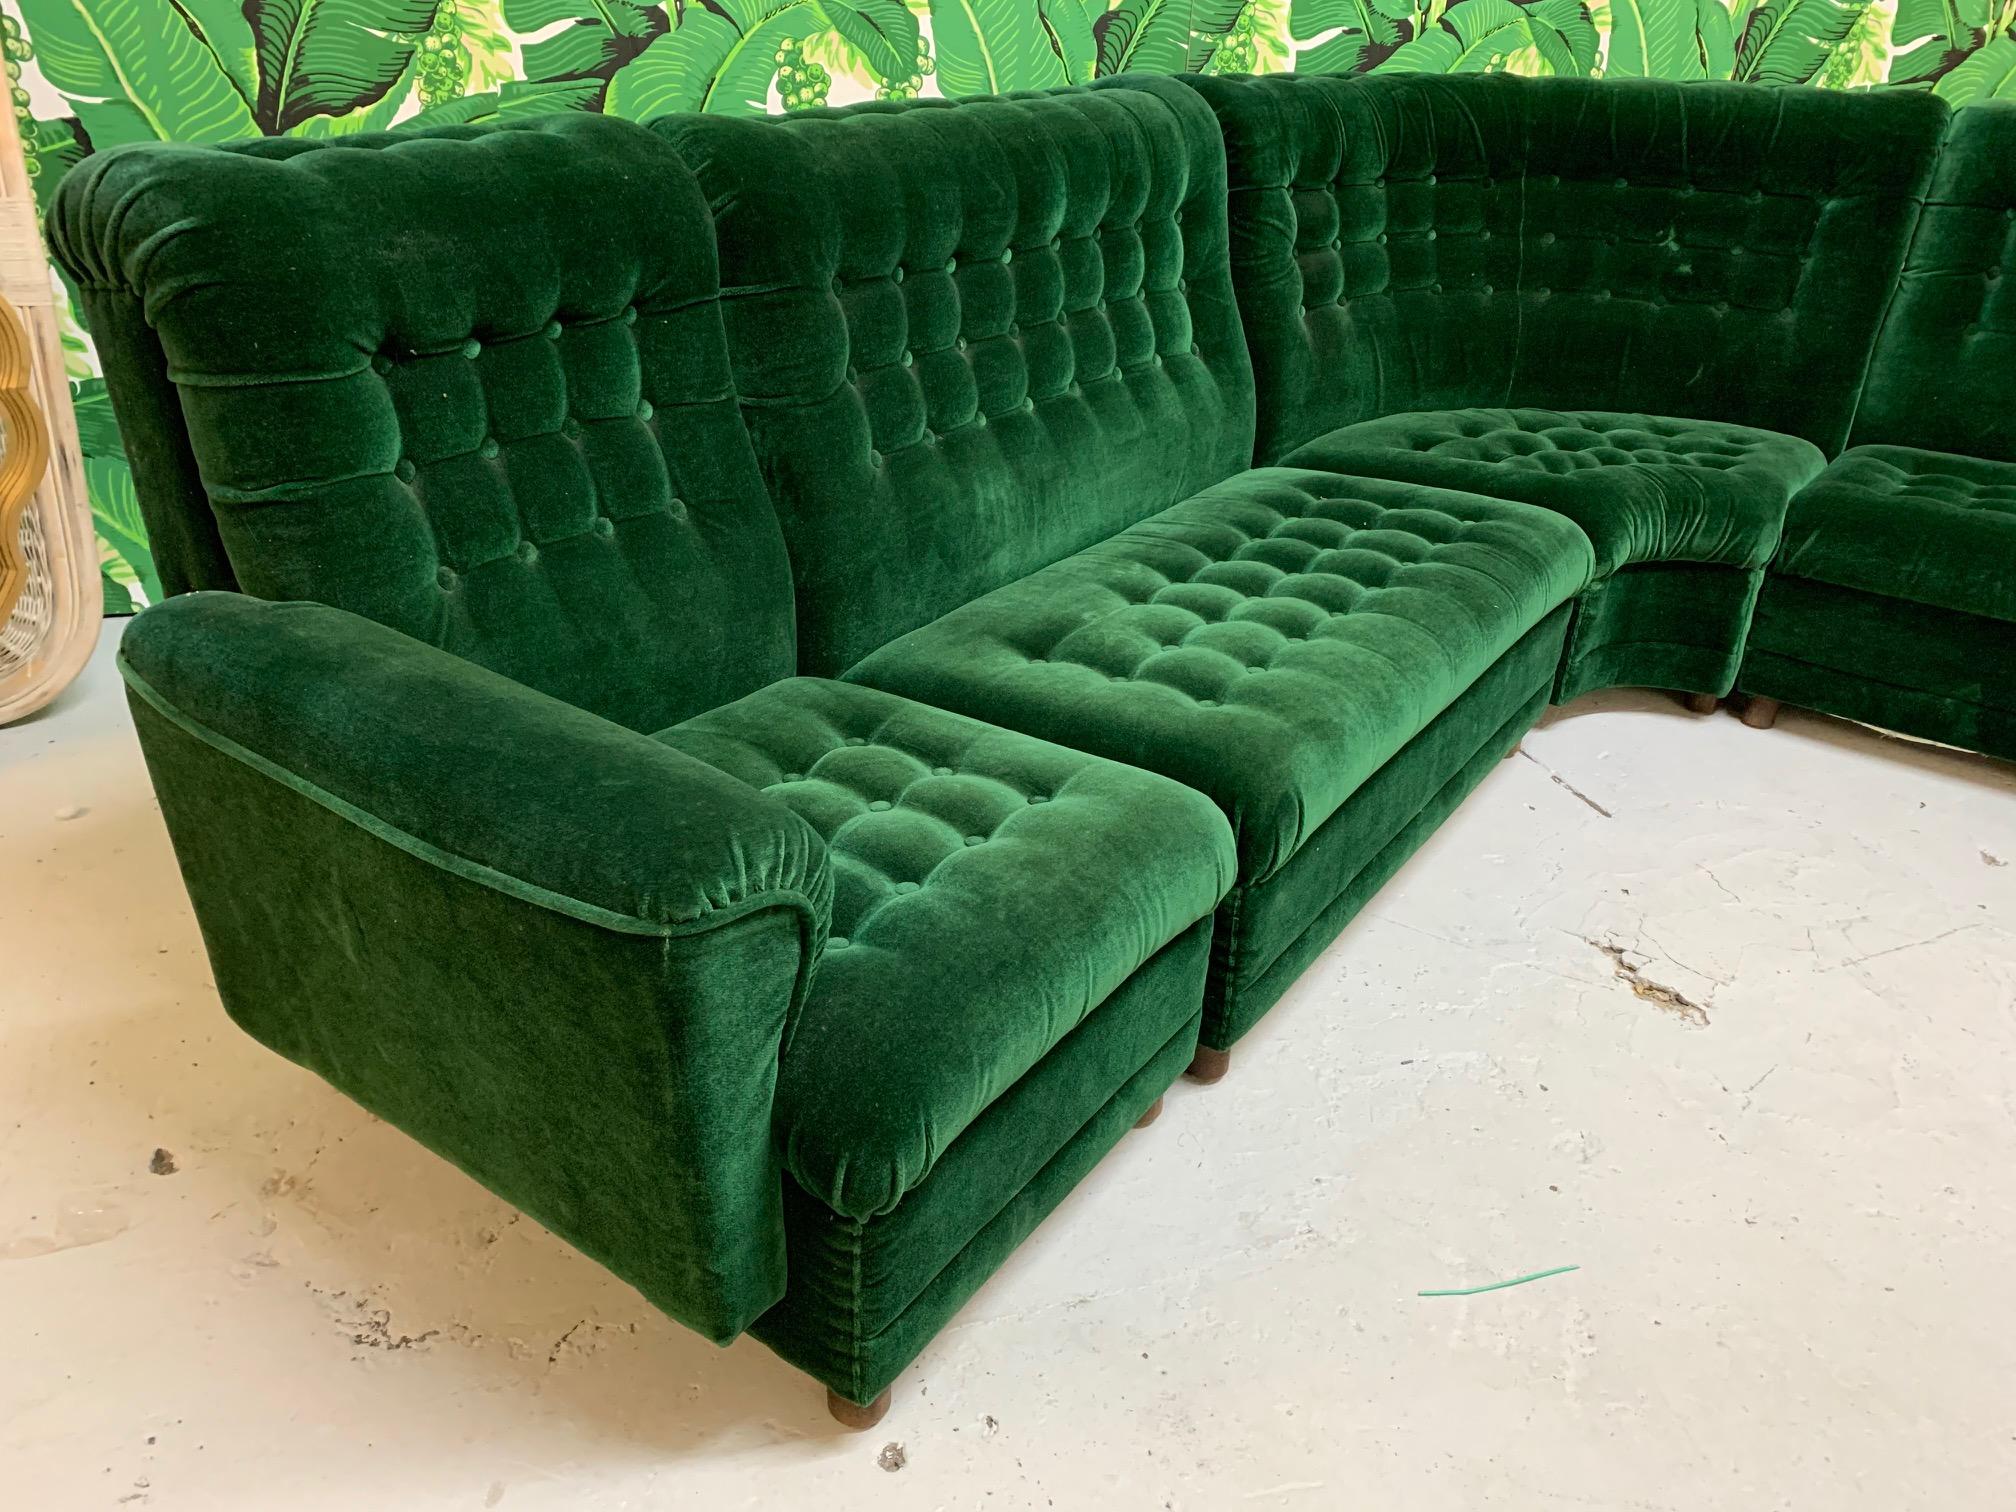 Large midcentury 5-piece sectional sofa features a deep, rich emerald green velvet upholstery and a tufted high back form. Very good condition with only very minor imperfections consistent with age. Total length is 115